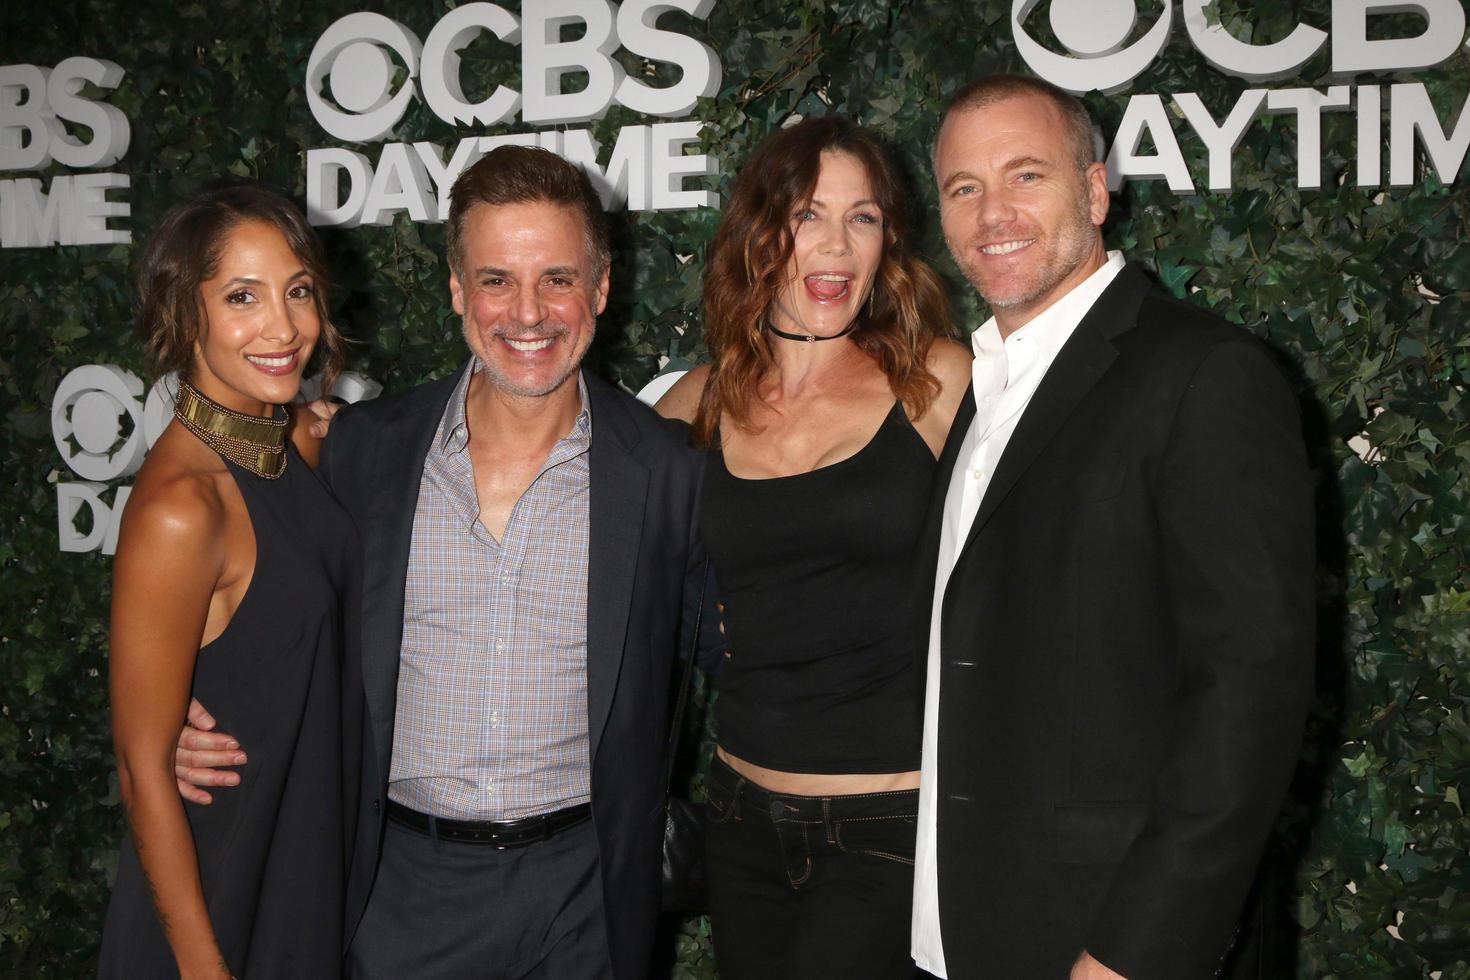 LOS ANGELES, OCT 10 - Christel Khalil, Christian LeBlanc, Stacy Haiduk, Sean Carrigan at the CBS Daytime 1 for 30 Years Exhibit Reception at the Paley Center For Media on October 10, 2016 in Beverly Hills, CA photo